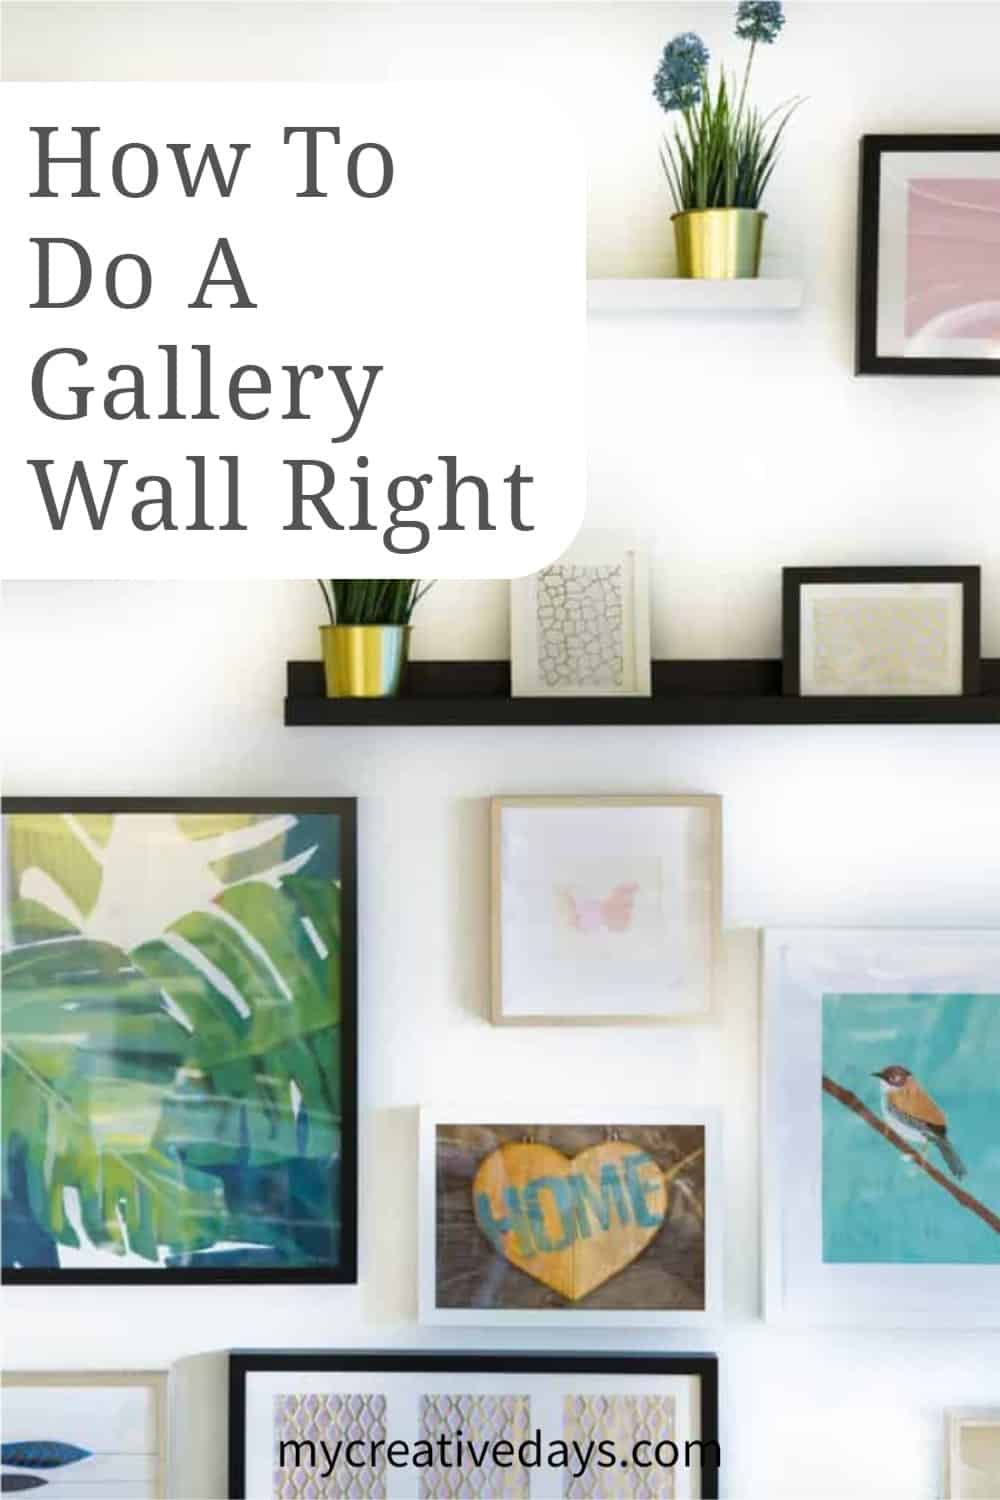 How To Do A Gallery Wall Right - My Creative Days